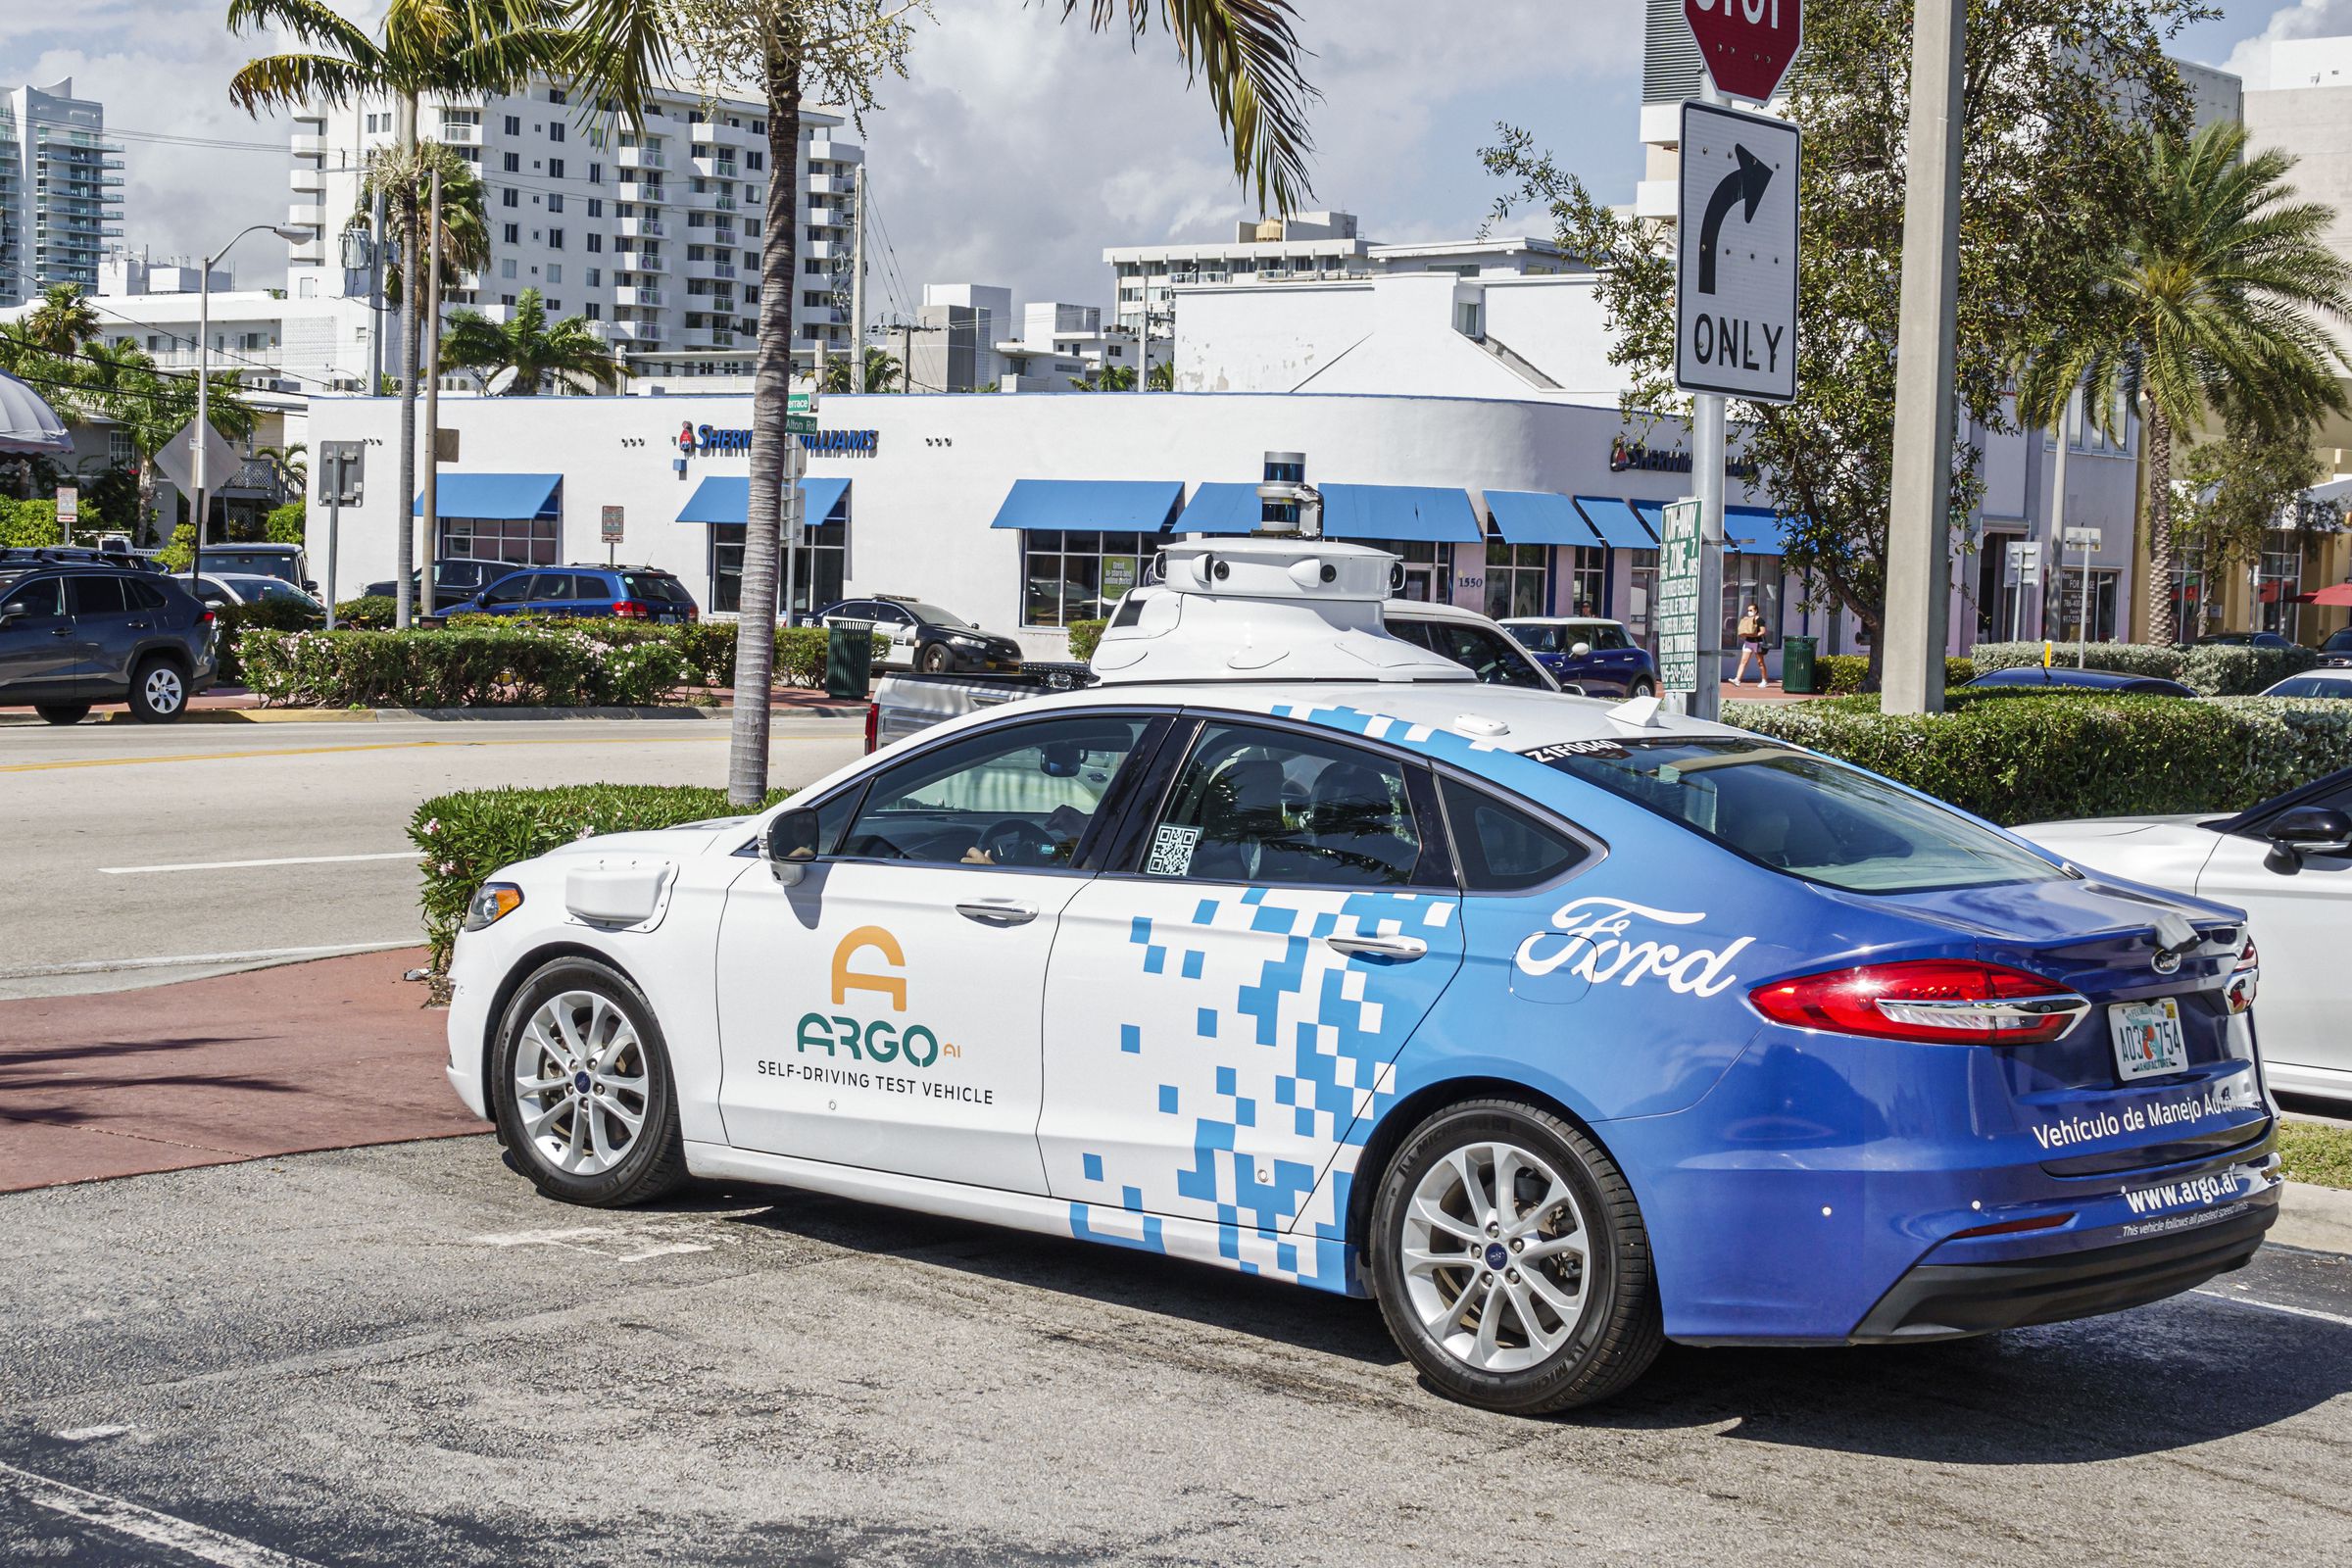 Florida, Miami Beach, ARGO self driving test vehicle by Ford